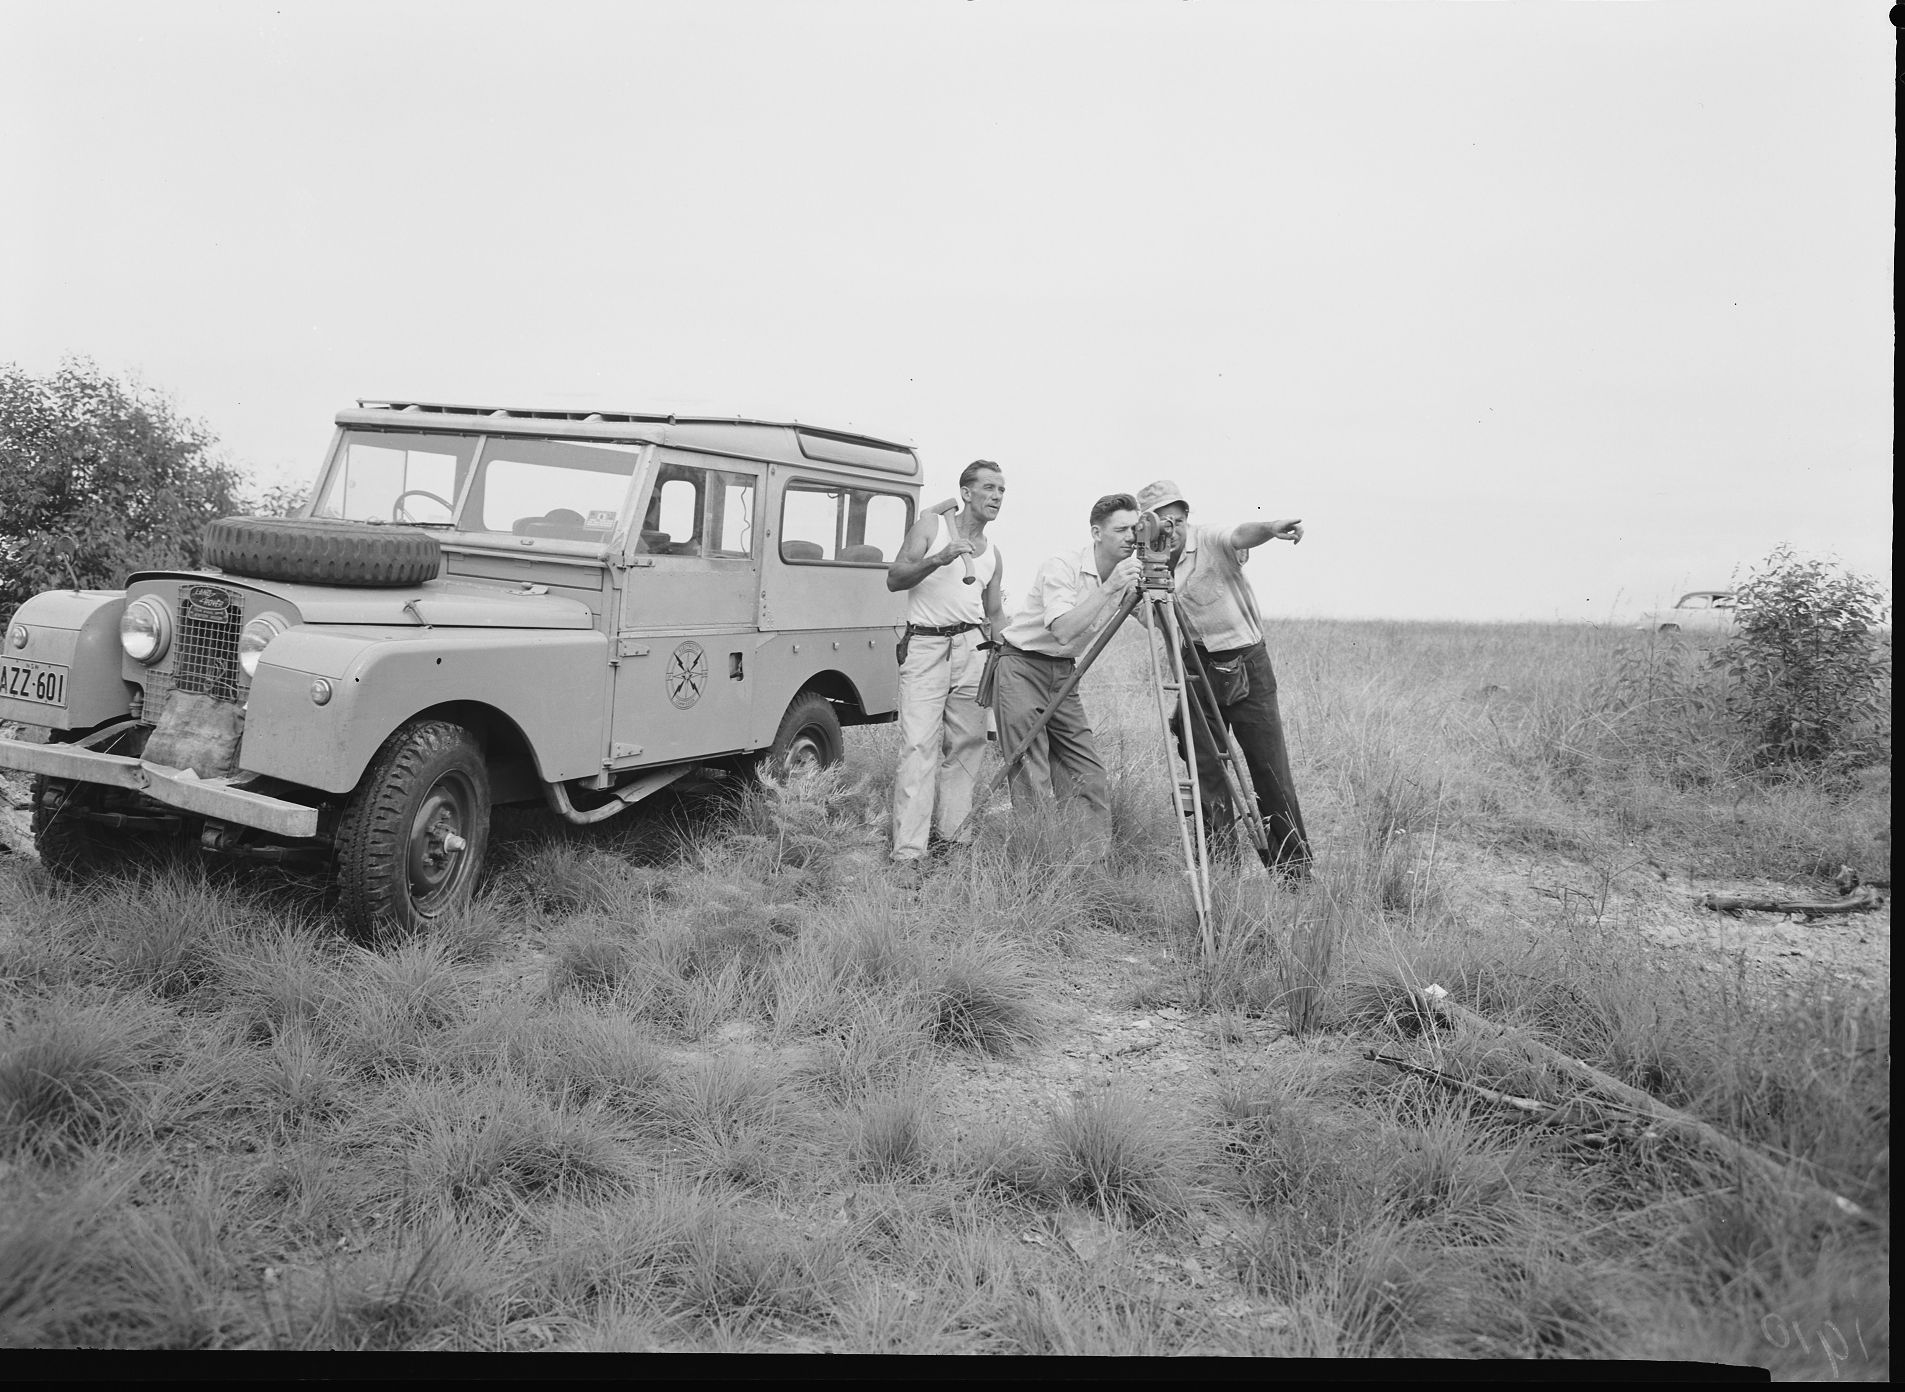 A group of surveyors with measuring instruments stranding in front of a jeep